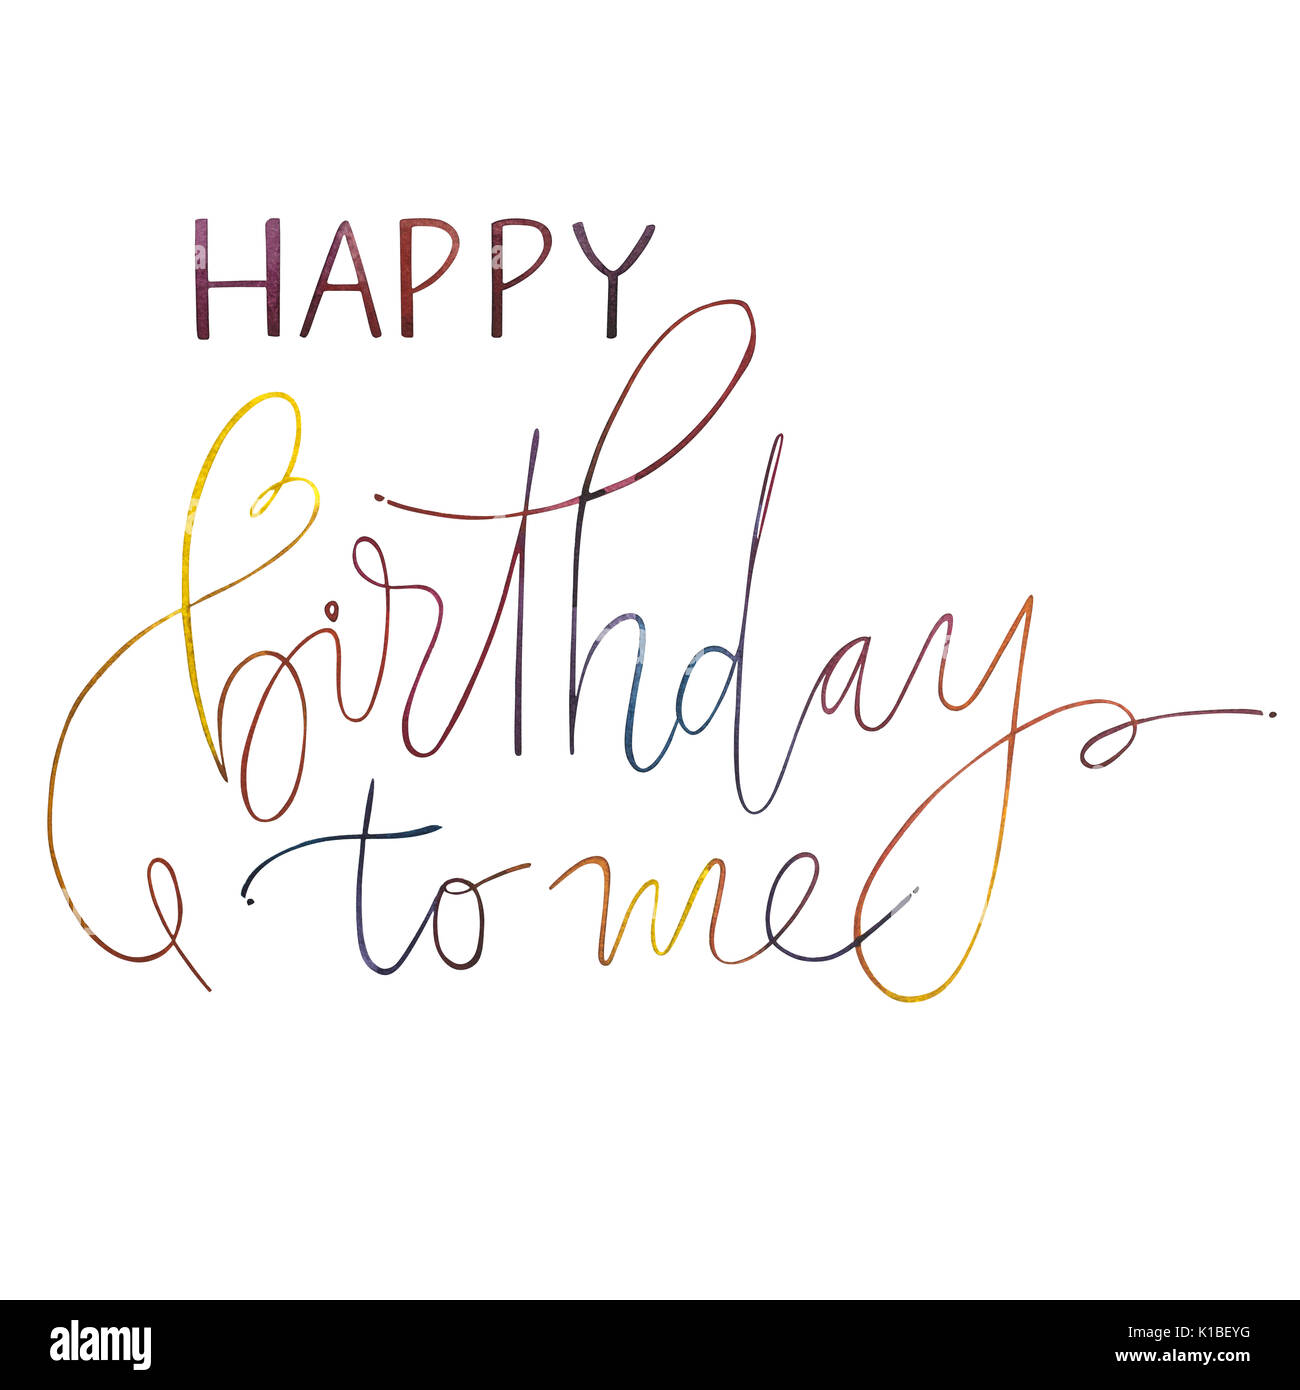 Happy Birthday Greeting Card Handwriting Banque D Image Et Photos Page 4 Alamy